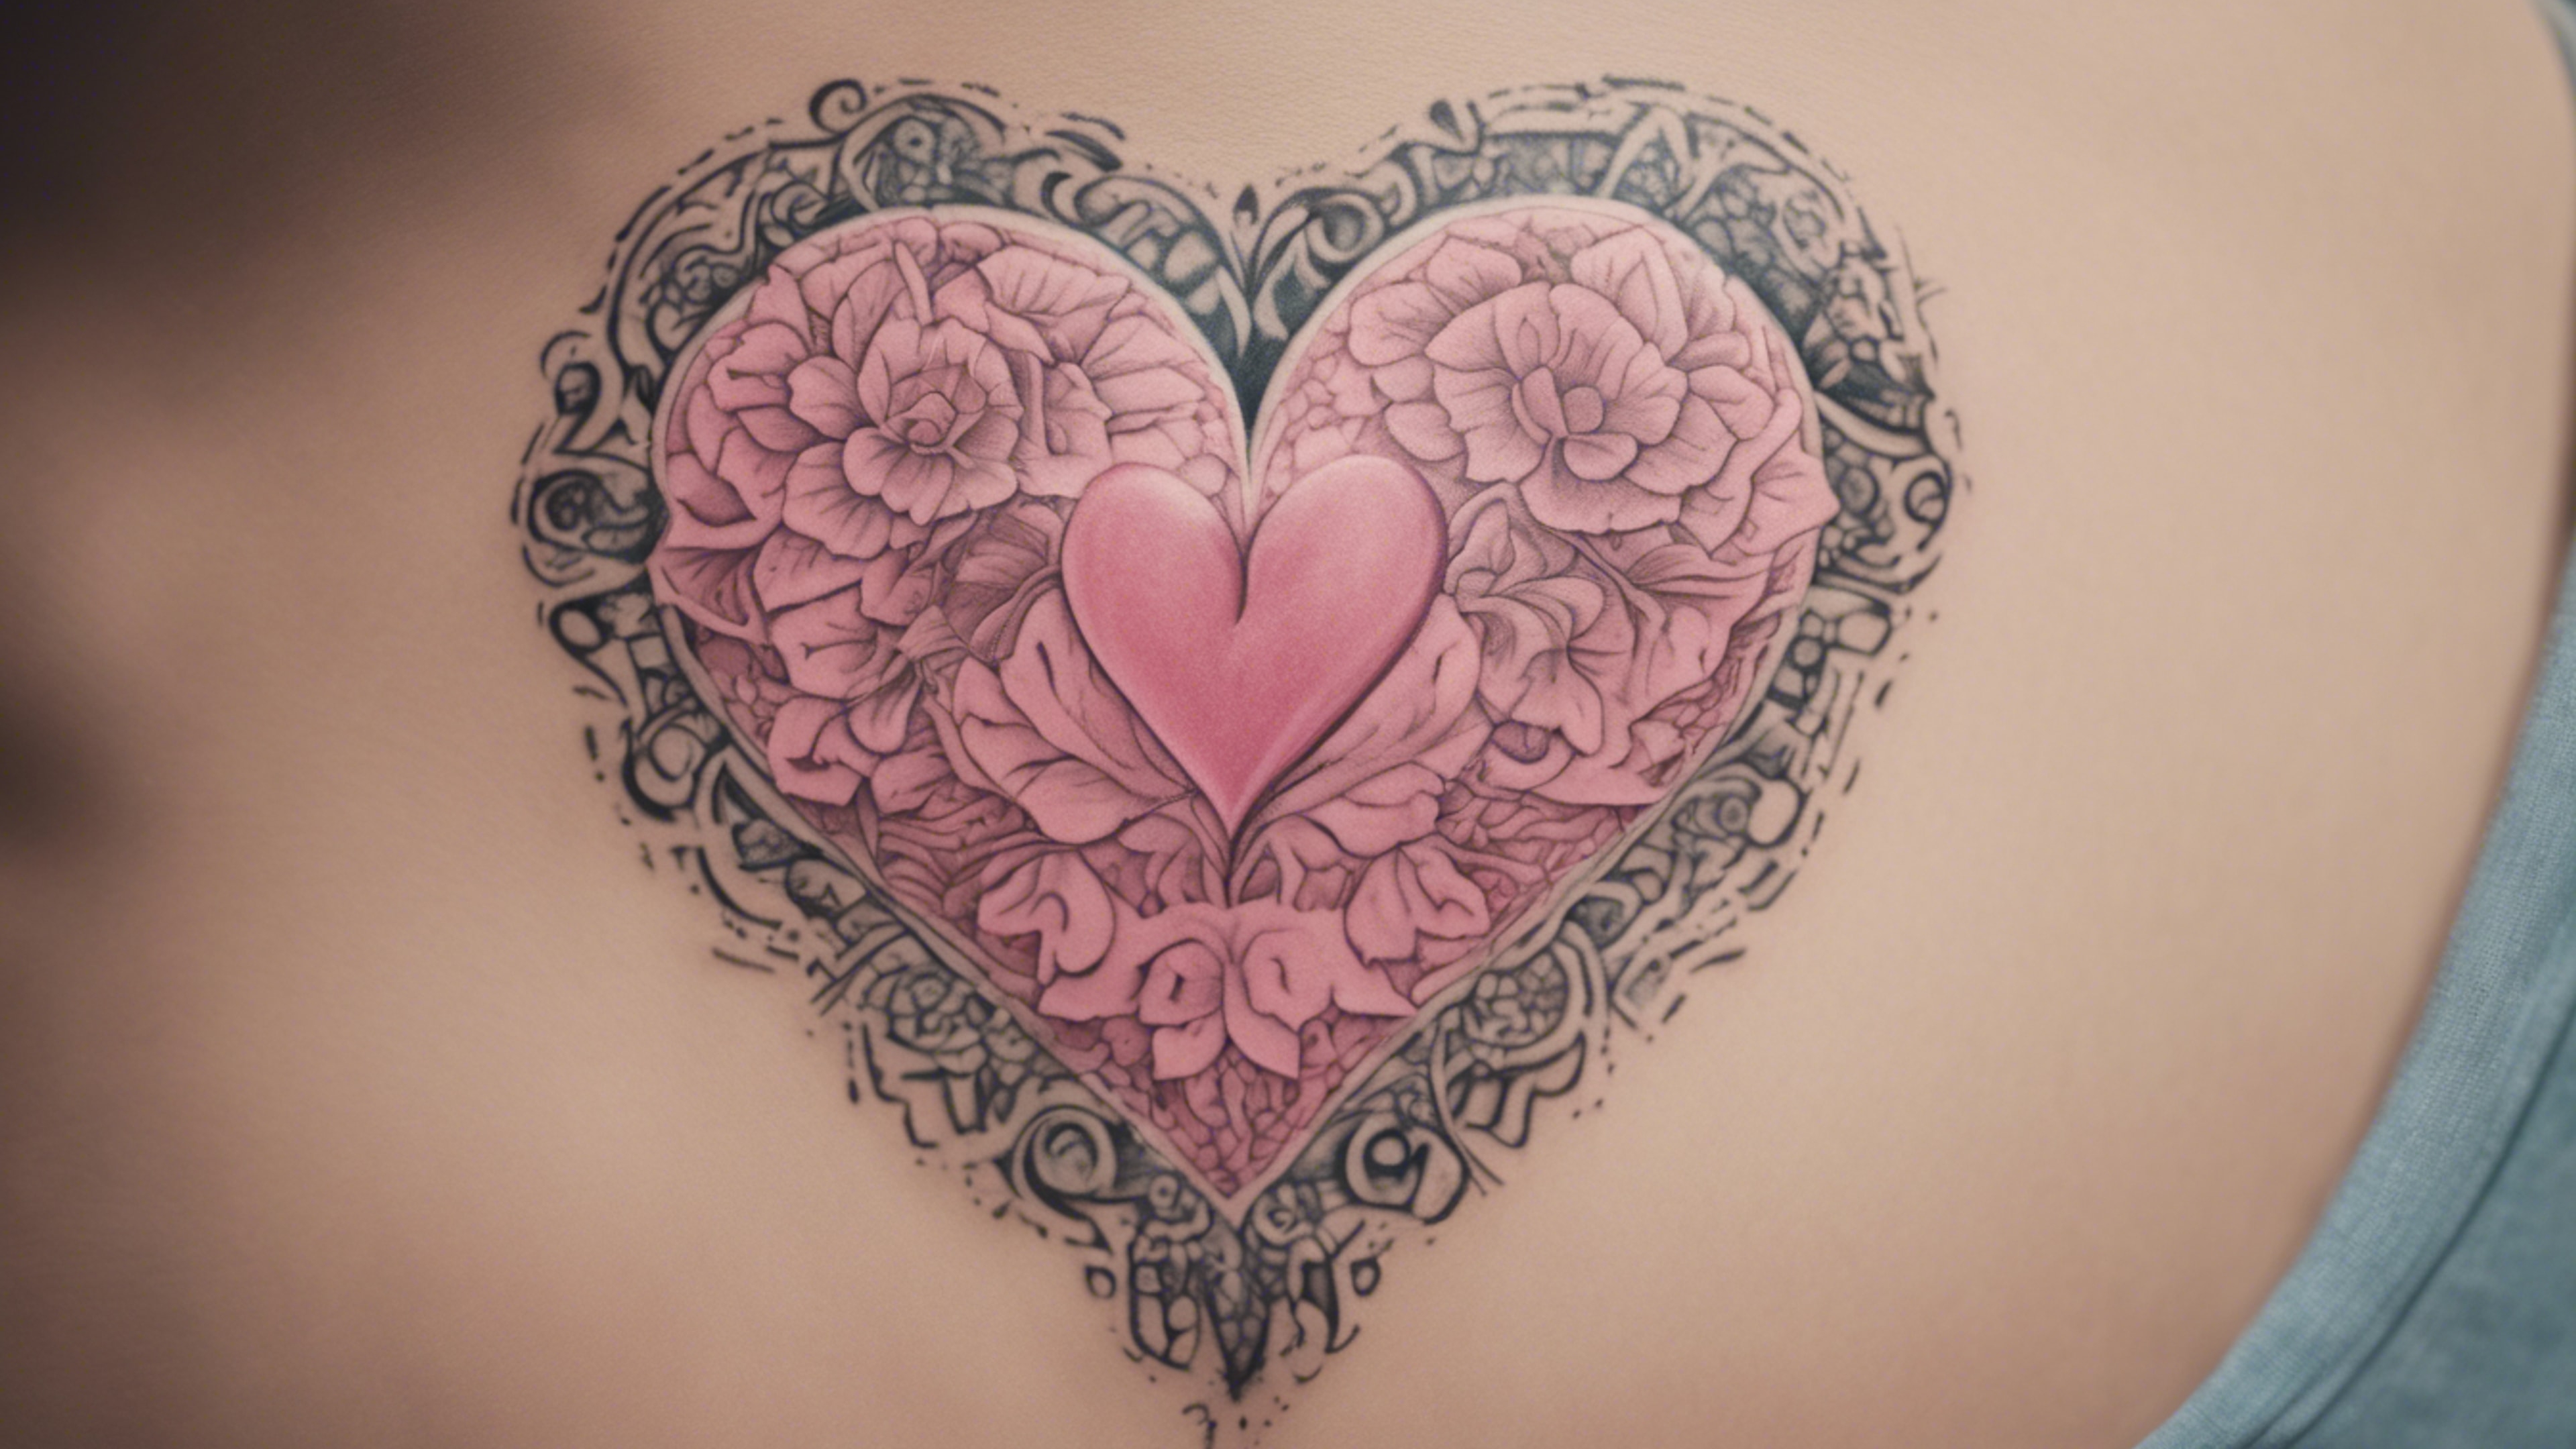 A small pink heart shaped tattoo embellished with intricate floral patterns. Wallpaper[dd23c5855ab44f40b2fe]